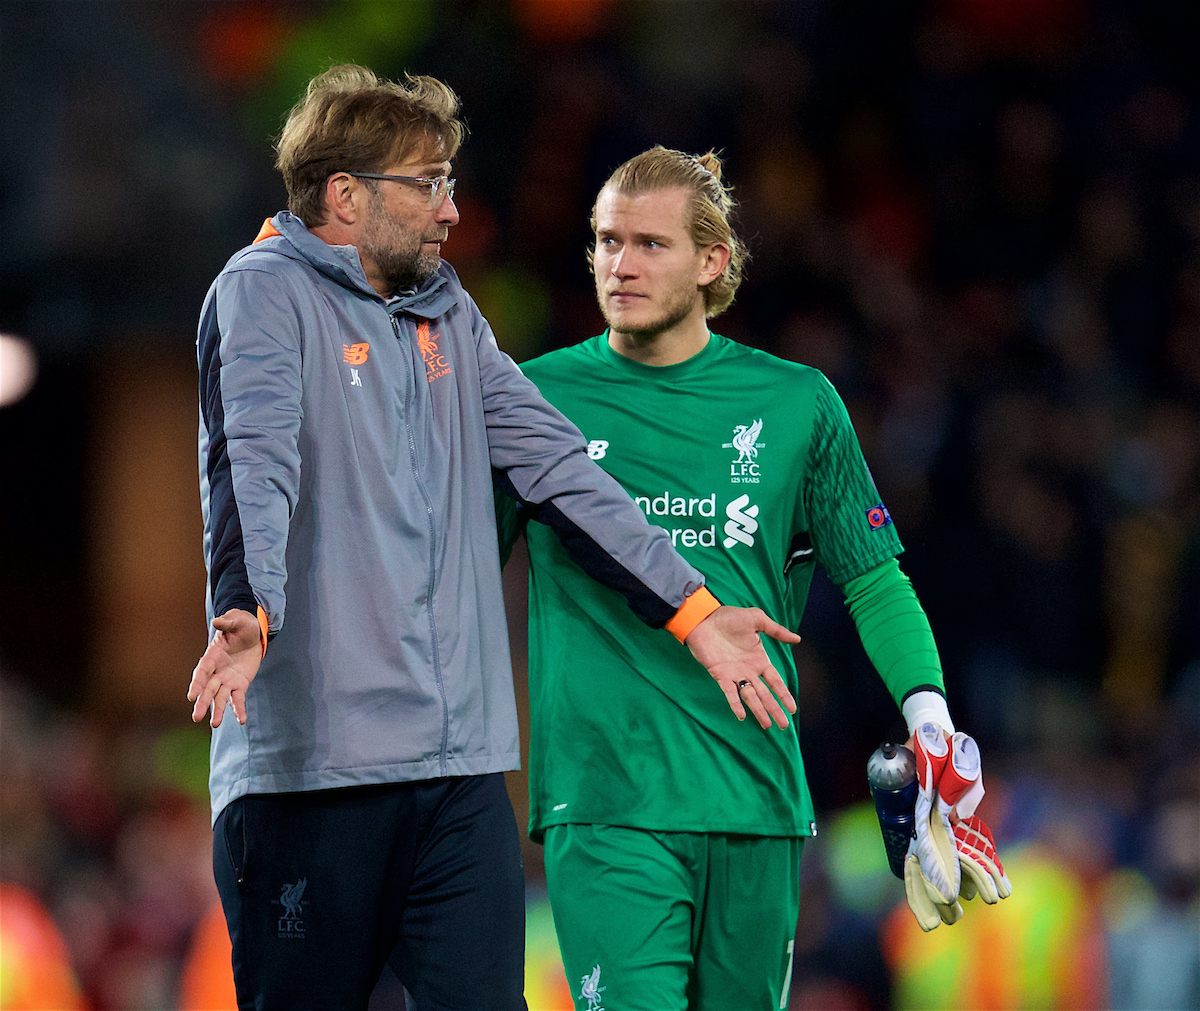 LIVERPOOL, ENGLAND - Tuesday, April 24, 2018: Liverpool's manager Jürgen Klopp and goalkeeper Loris Karius after the 5-2 victory over AS Roma during the UEFA Champions League Semi-Final 1st Leg match between Liverpool FC and AS Roma at Anfield. (Pic by David Rawcliffe/Propaganda)